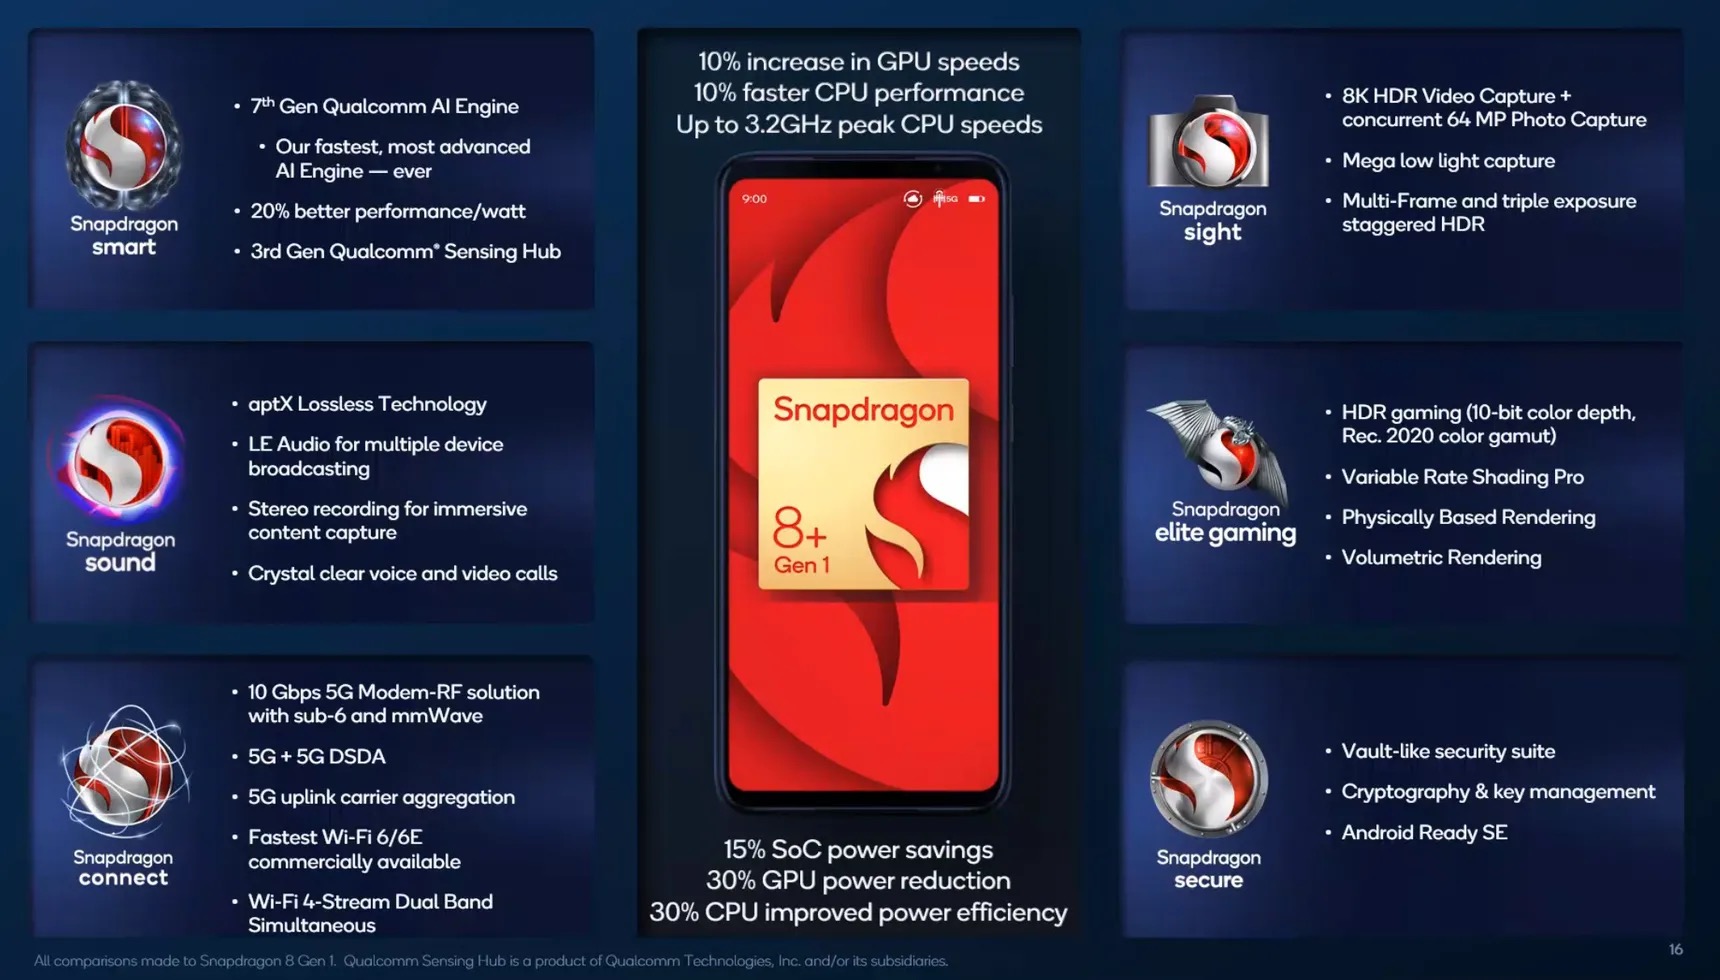 Qualcomm announces Snapdragon 8+ Gen 1 for those who think the current processor is not enough